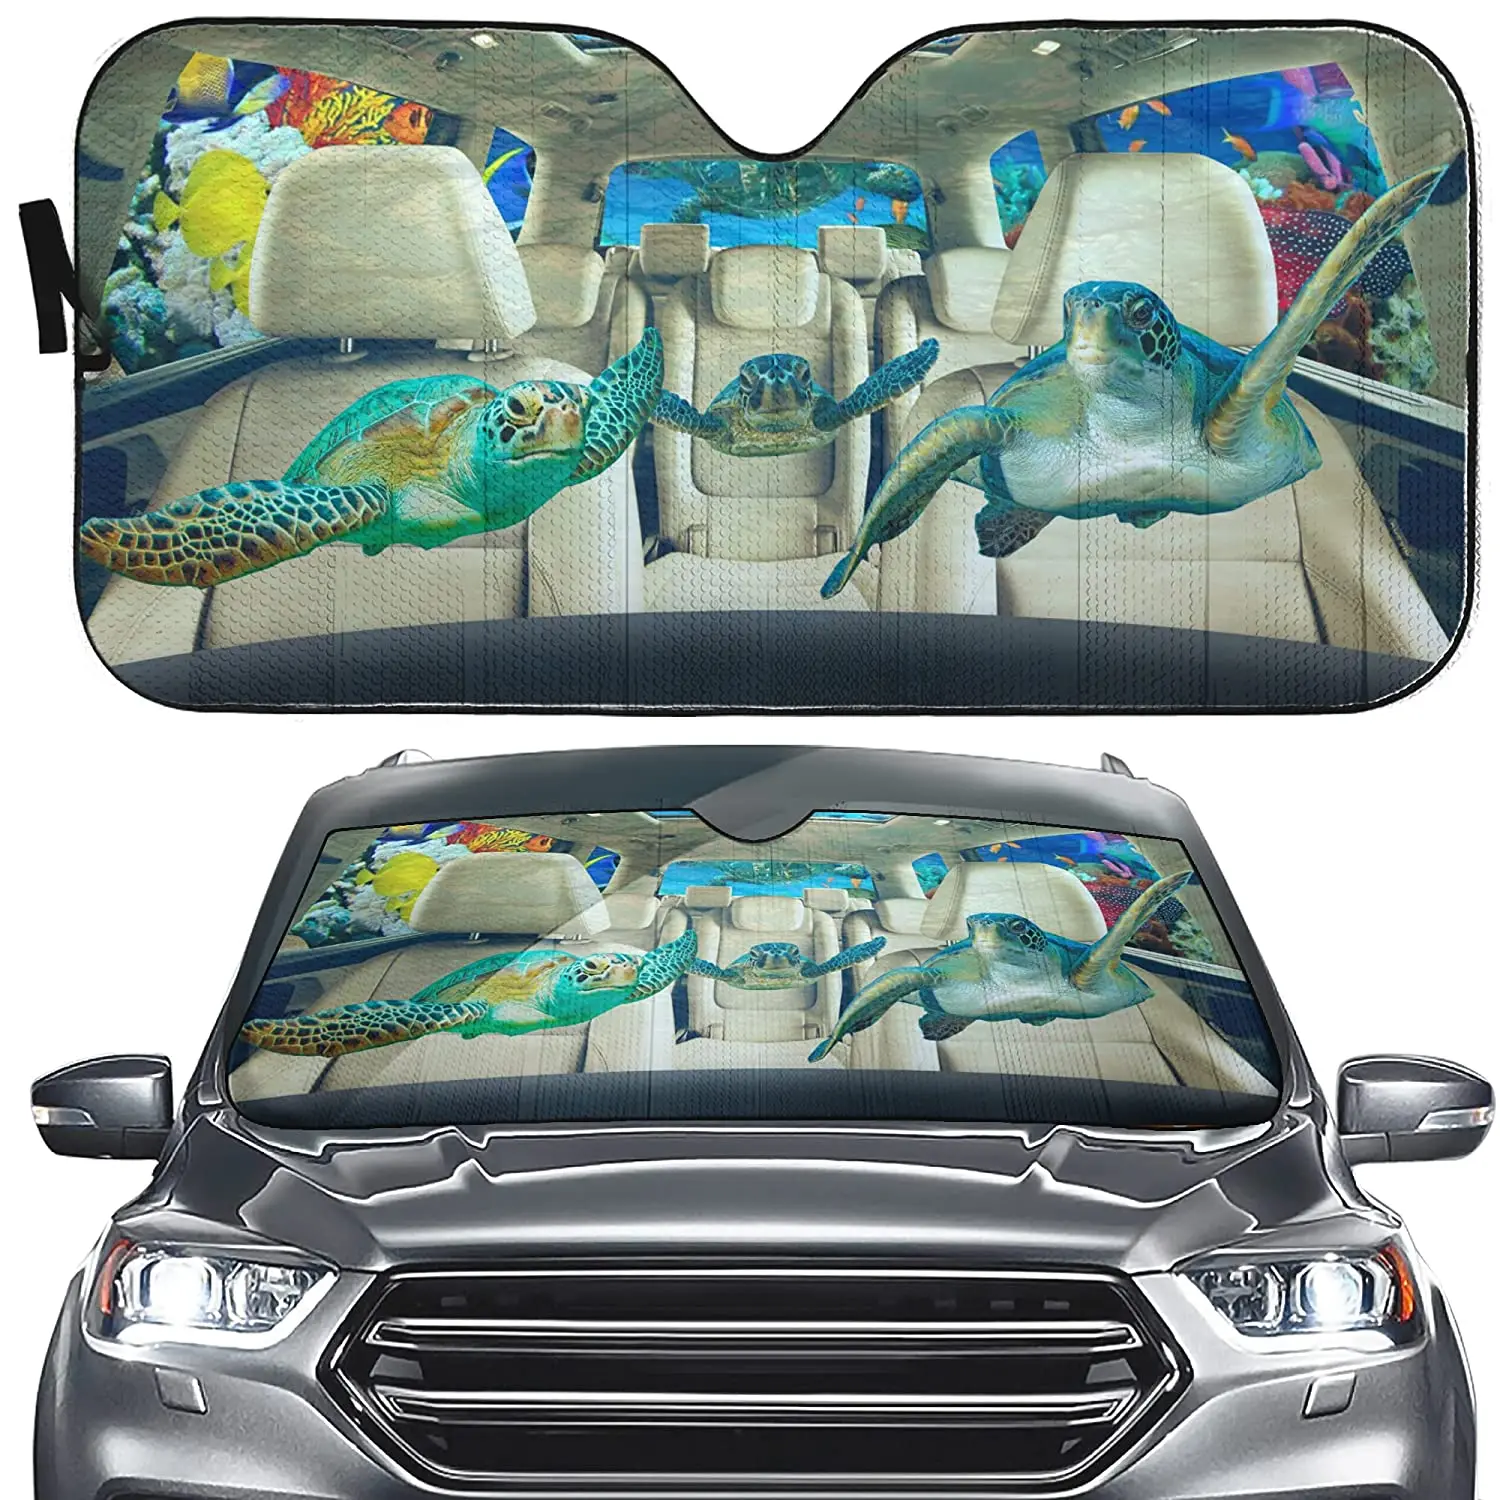 

Sea Turtle Swimming Windshield Window Sunshade for Car, Block UV,Tortoise Driving Auto Front Window Sun Shade Cover,Outdoor Prot